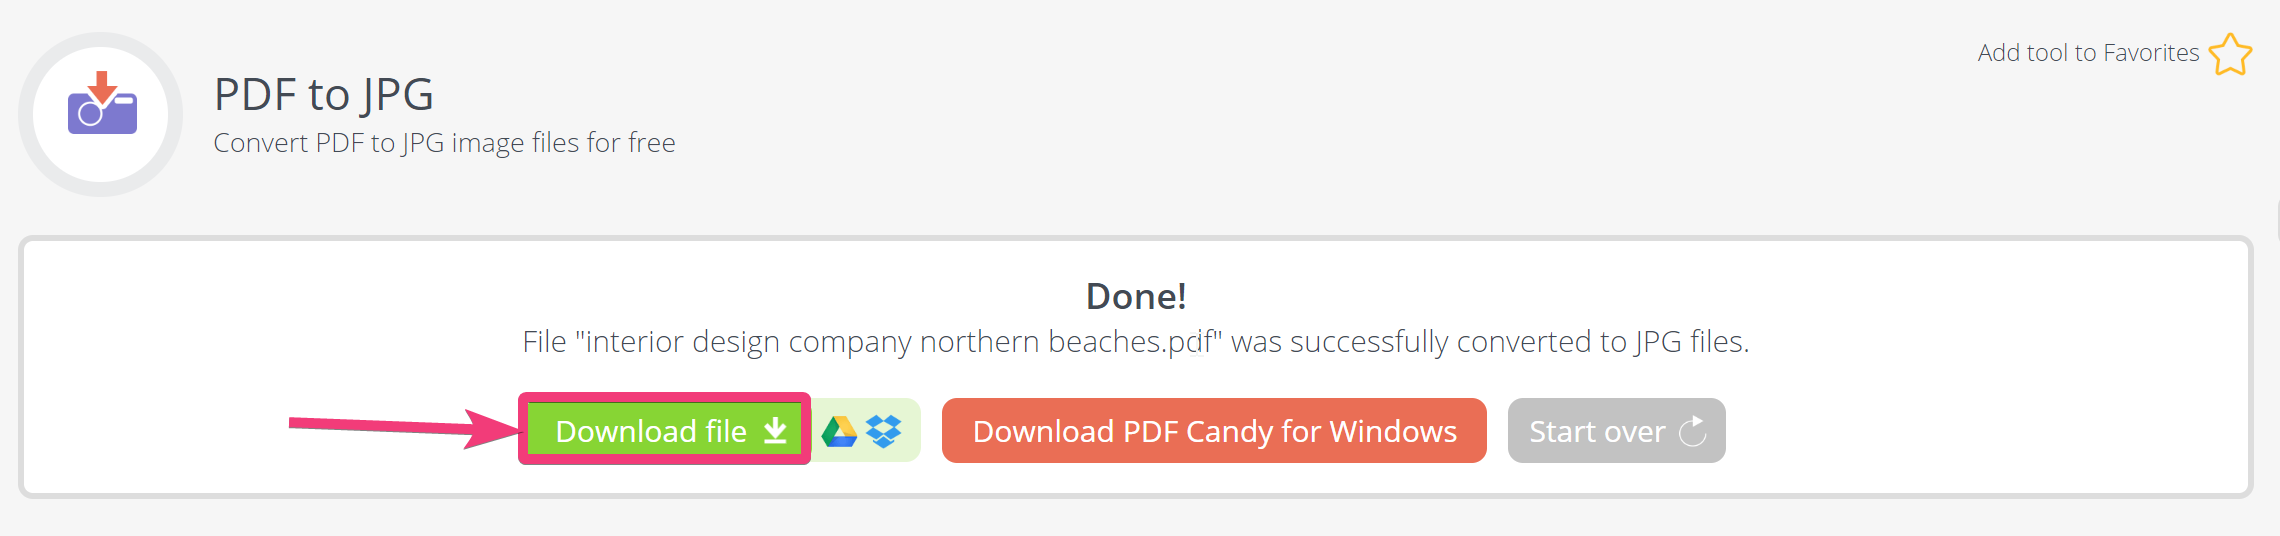 PDF Candy supports Google Drive and Dropbox cloud storage services.